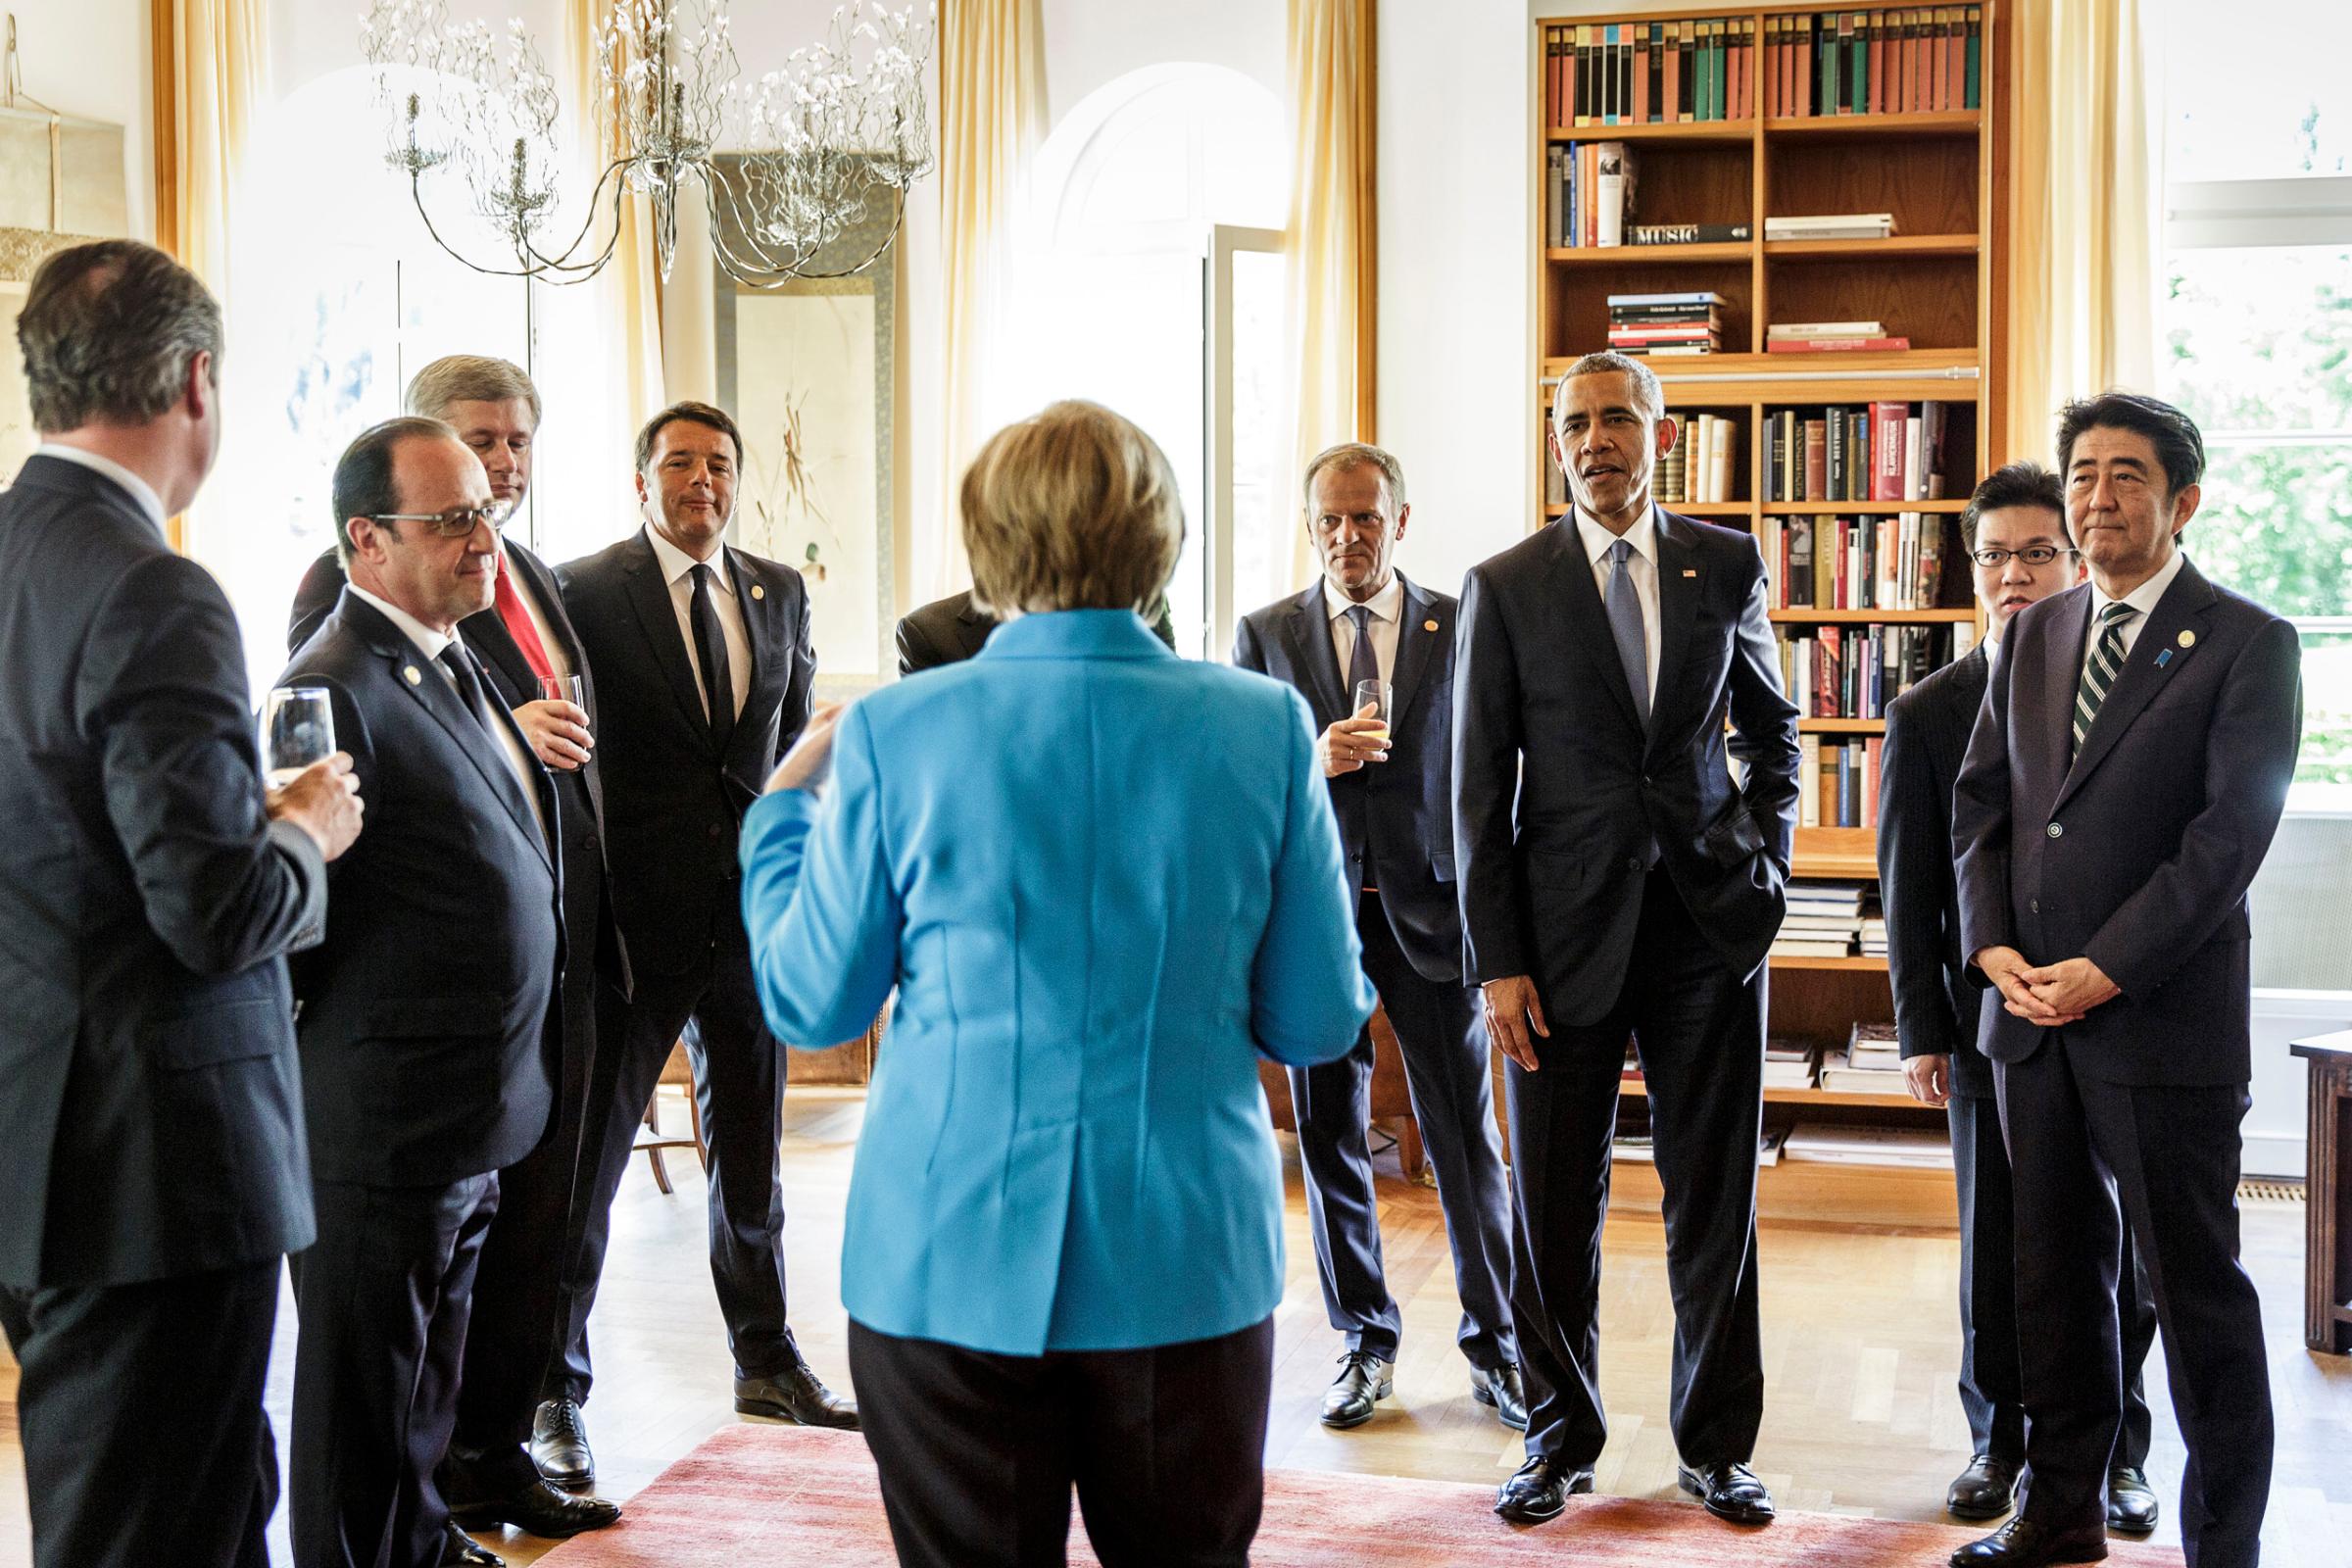 Chancellor Merkel welcomes G7 heads of states shortly before the summit's official start. June 7, 2015.